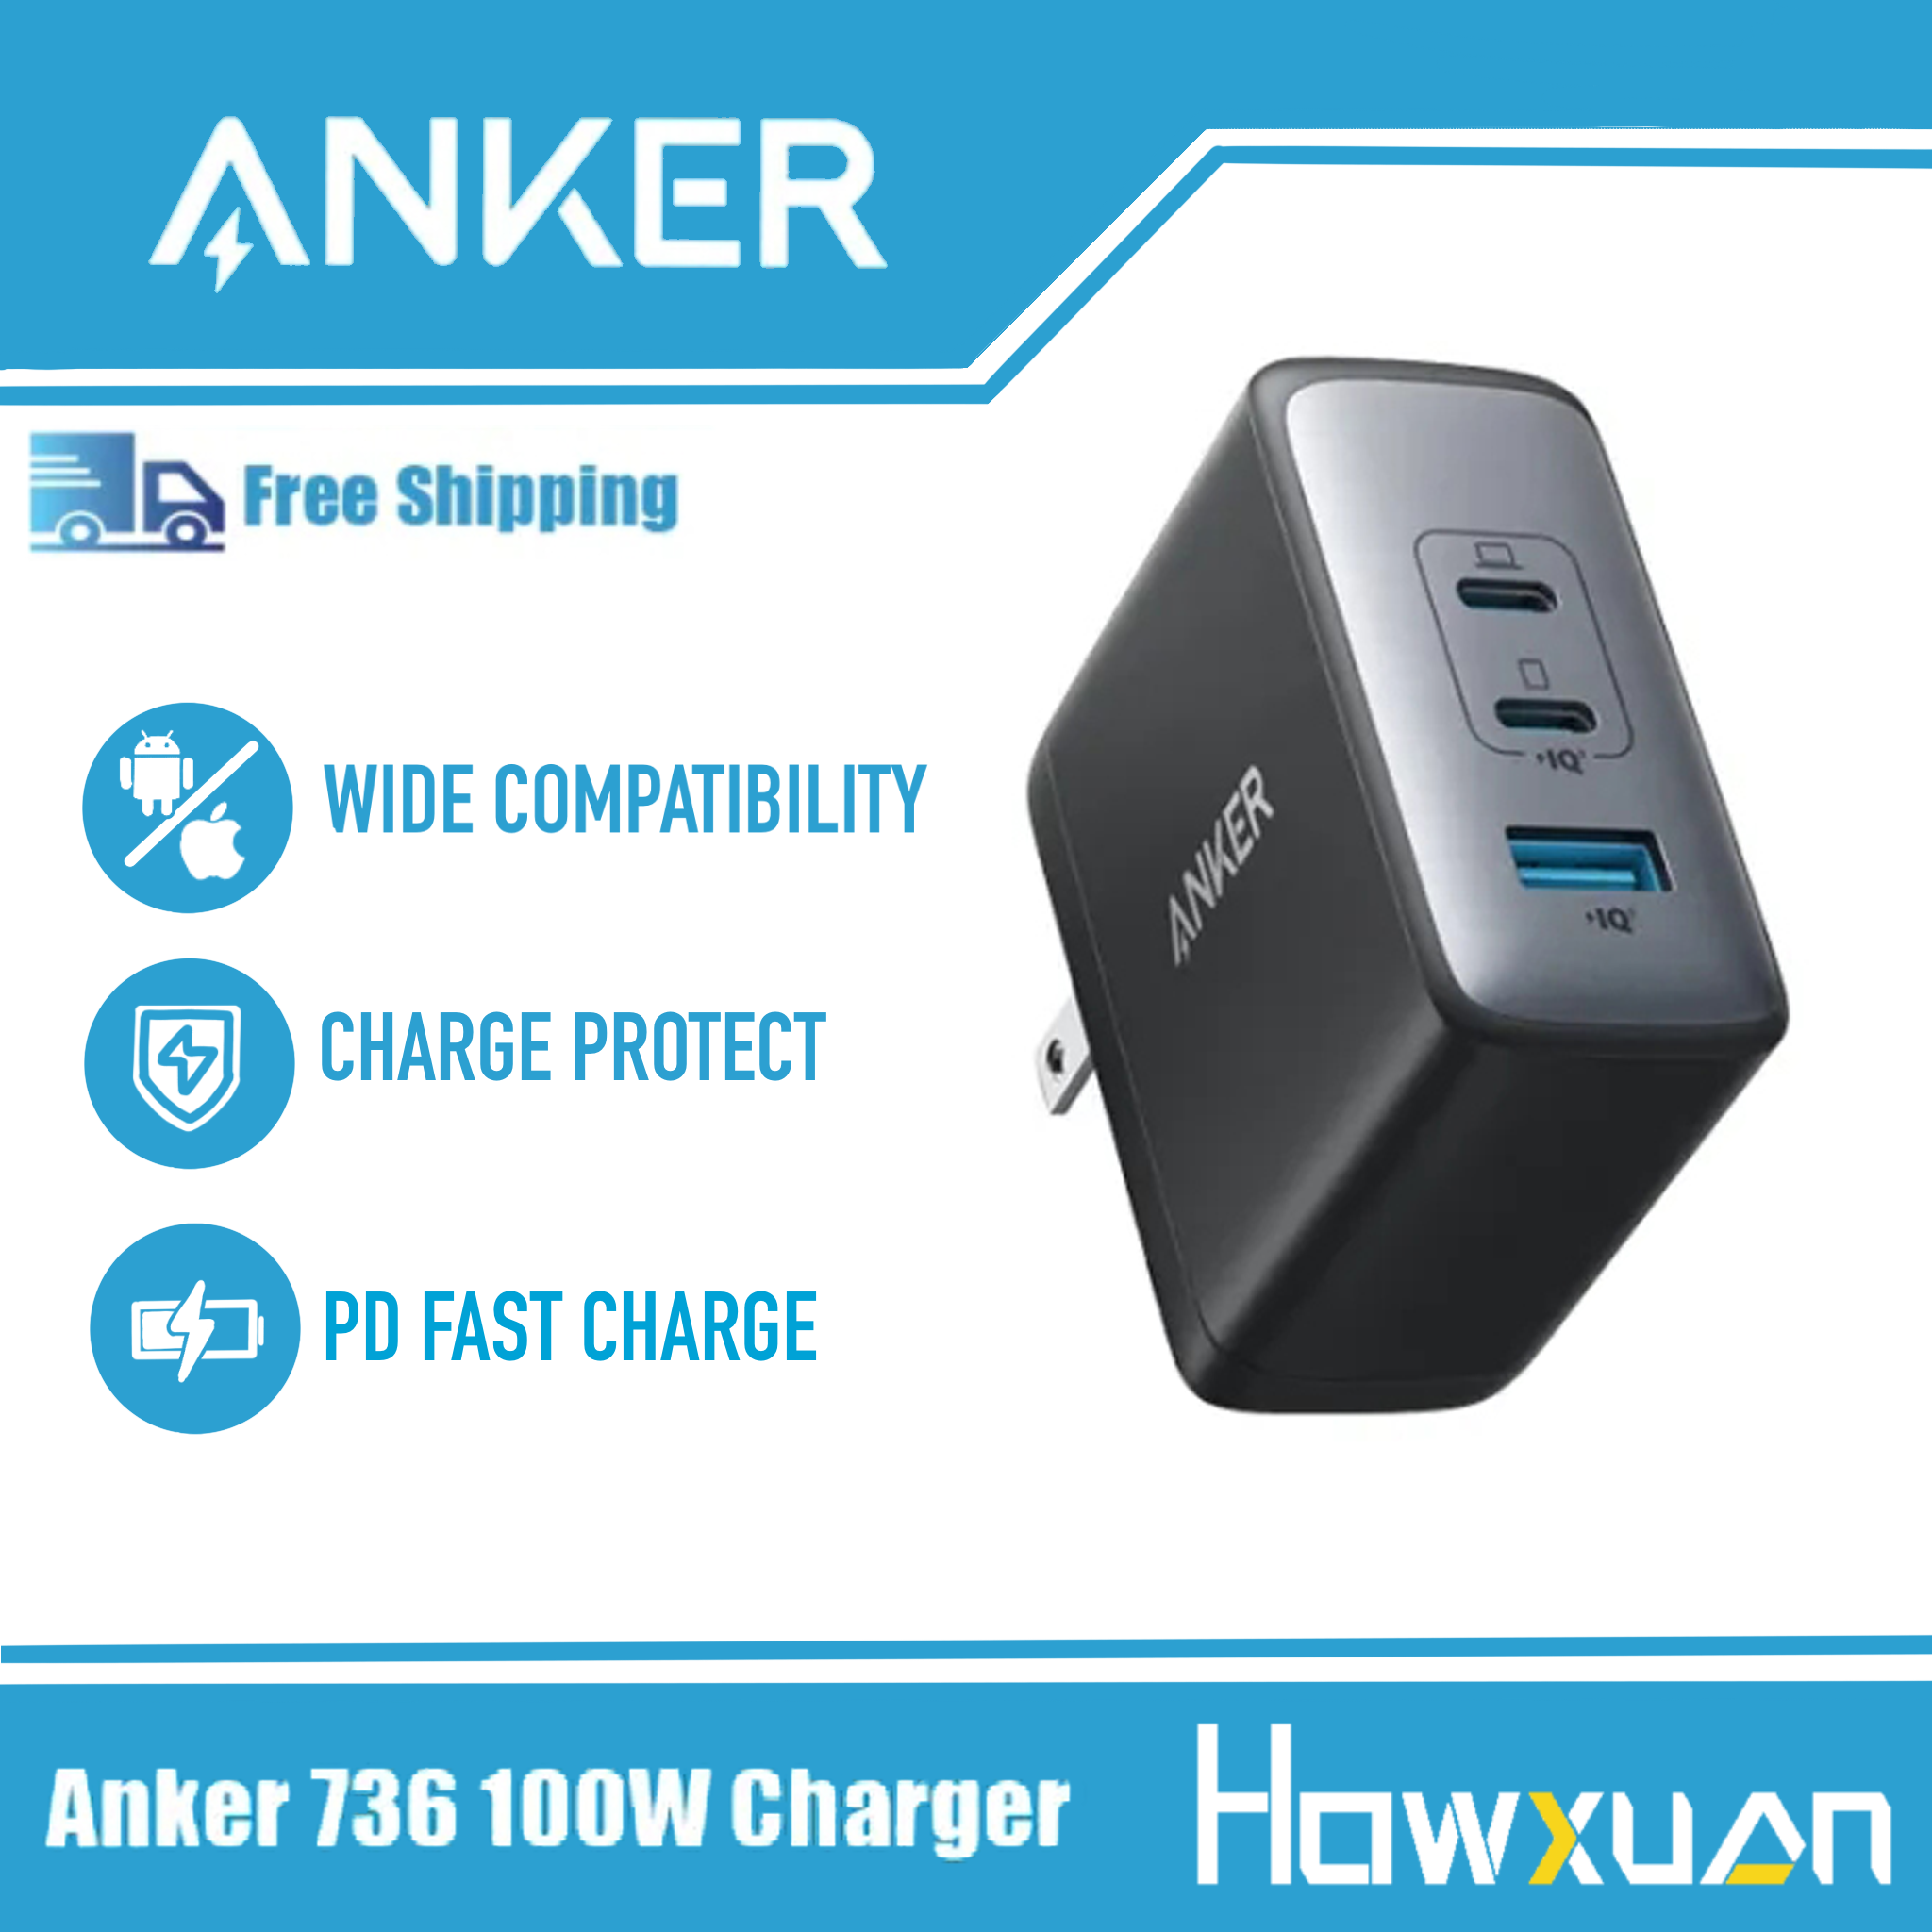 Anker 100W USB C Charger, 736 Charger, 3